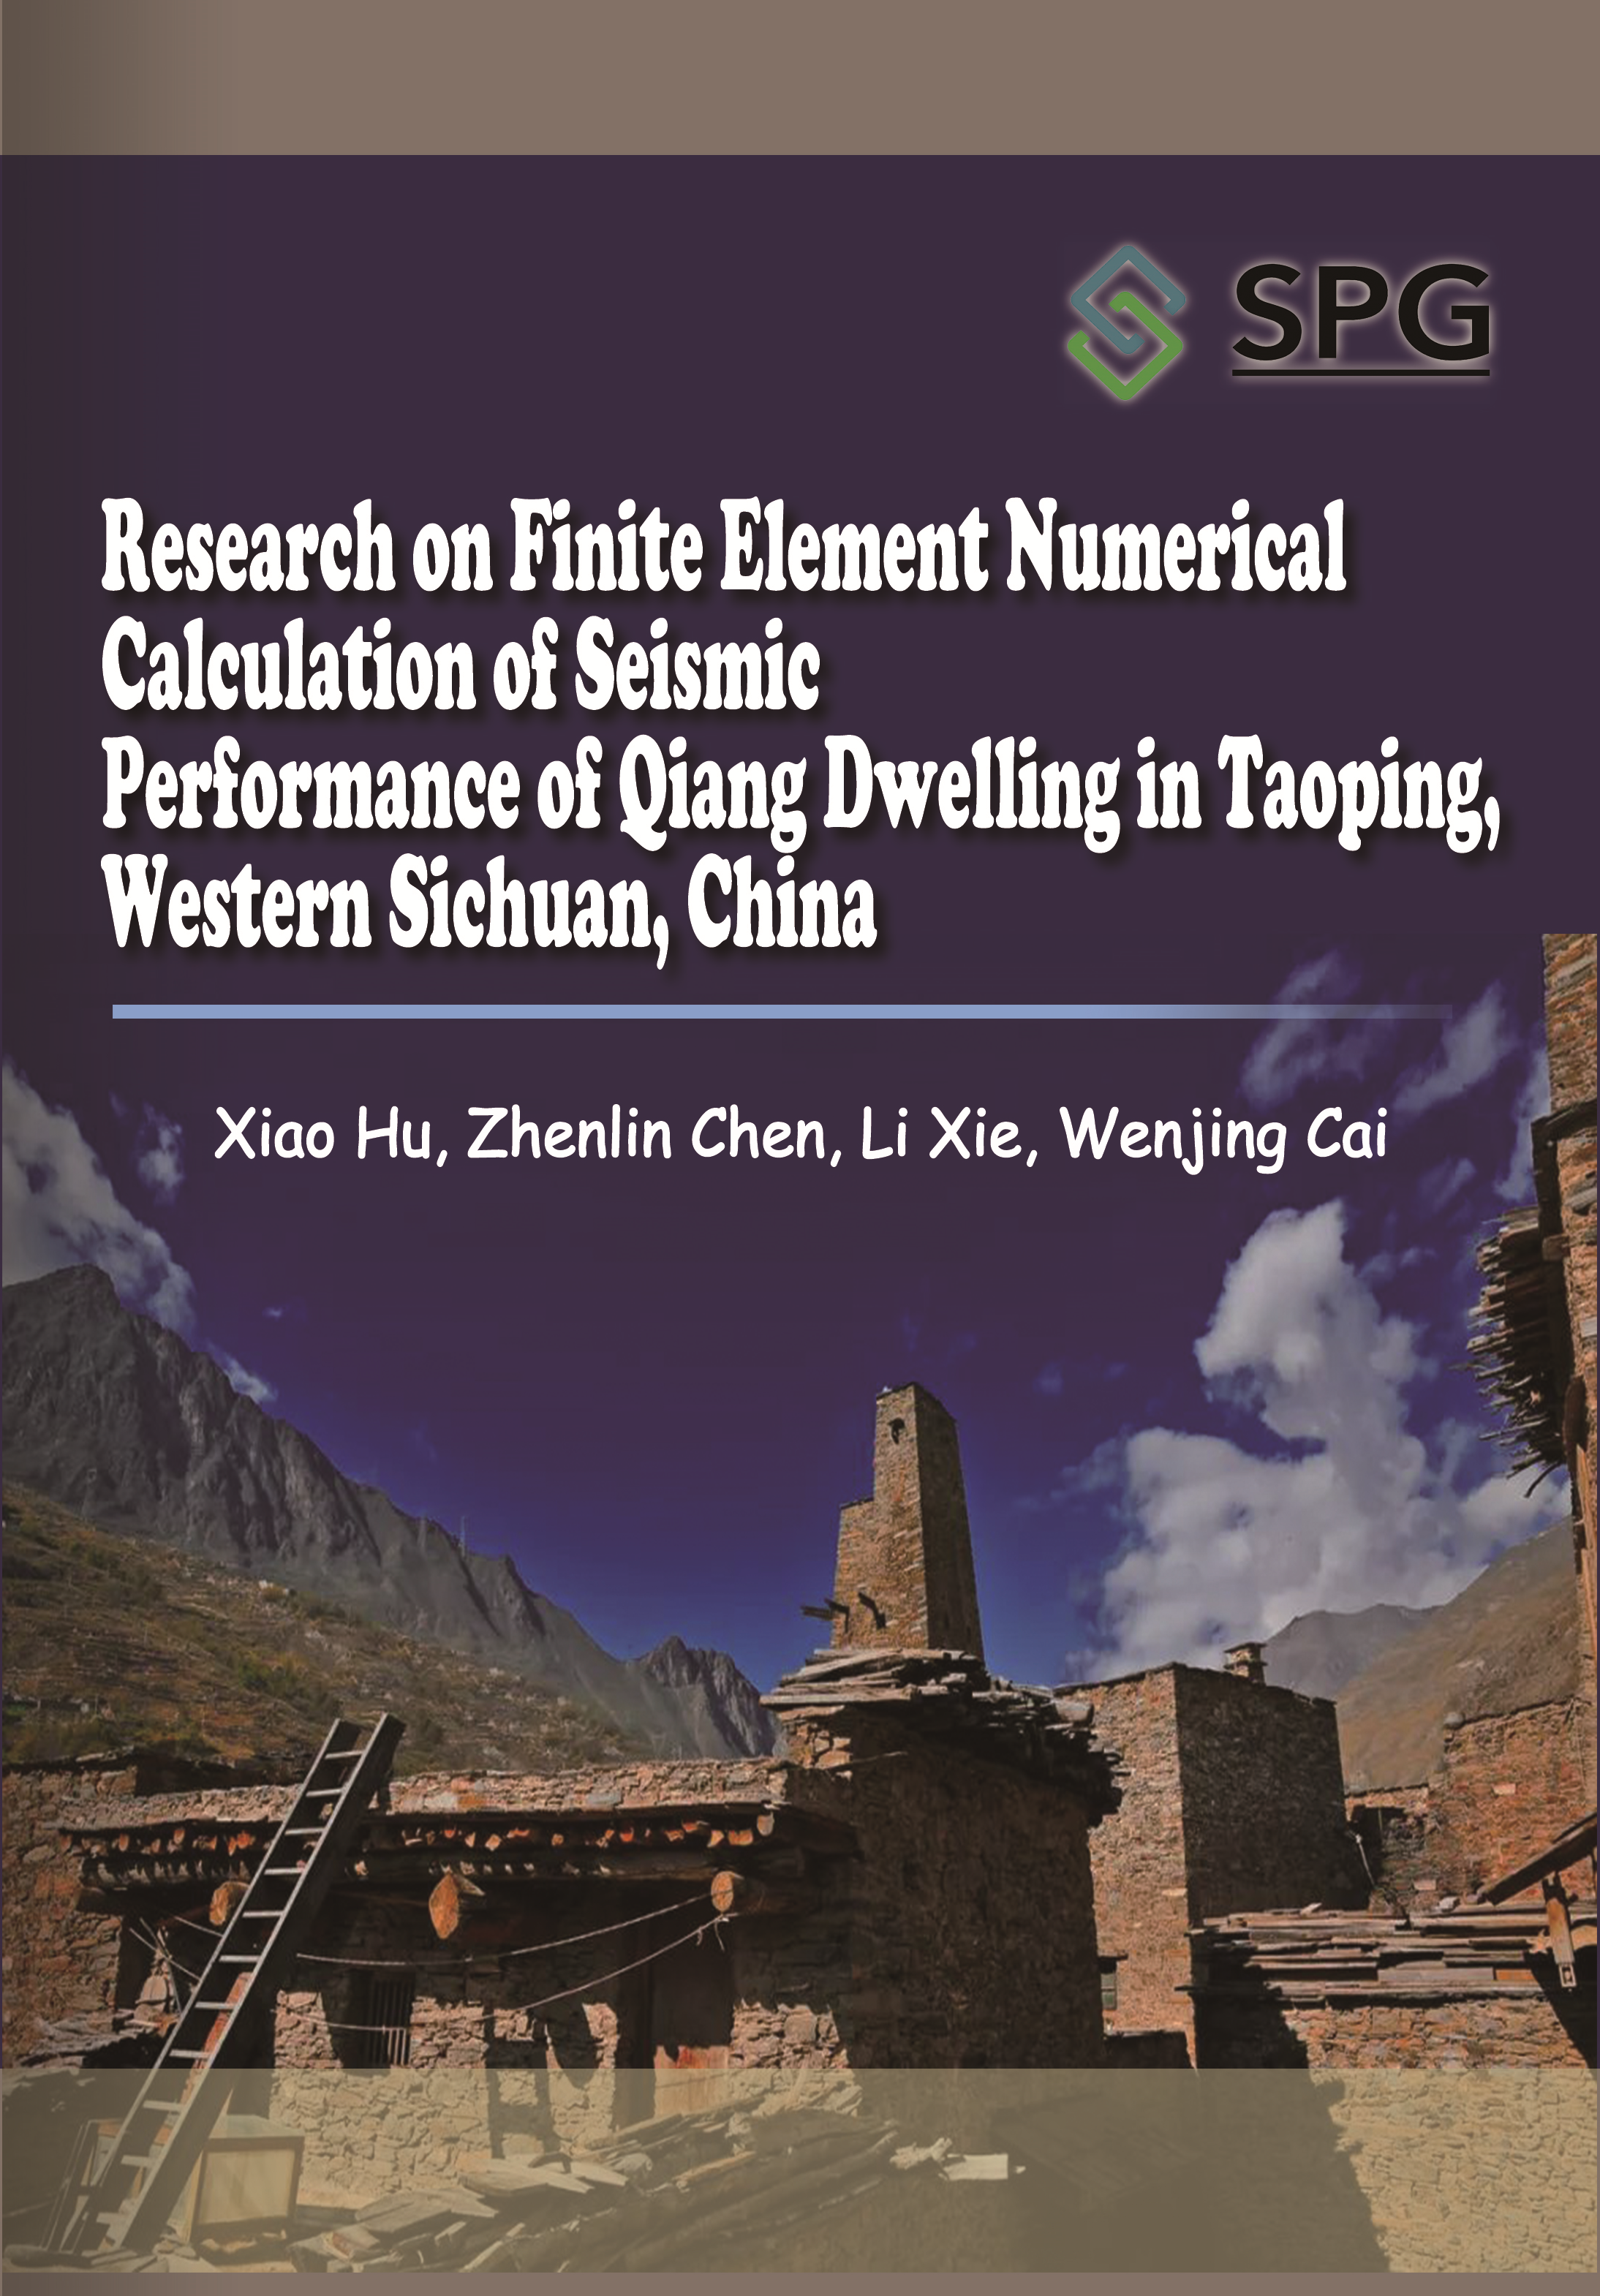 Research on Finite Element Numerical Calculation of Seismic Performance of Qiang Dwelling in Taoping, Western Sichuan, China | Scholar Publishing Group